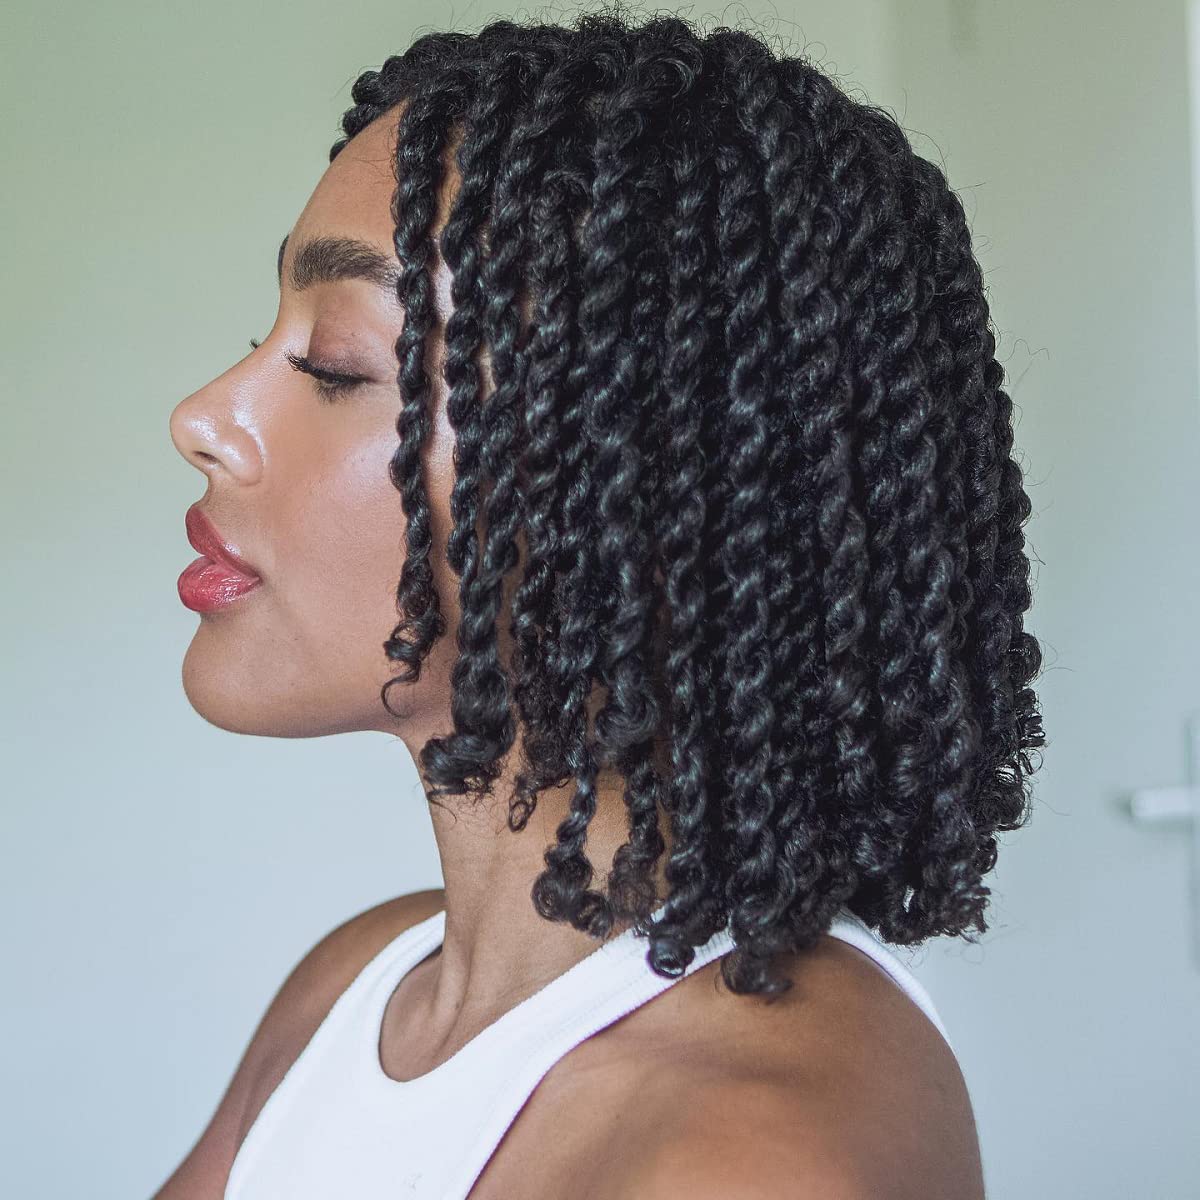 Short Passion Twist Hair 8 Inch, 8 Packs Pre-twisted Passion